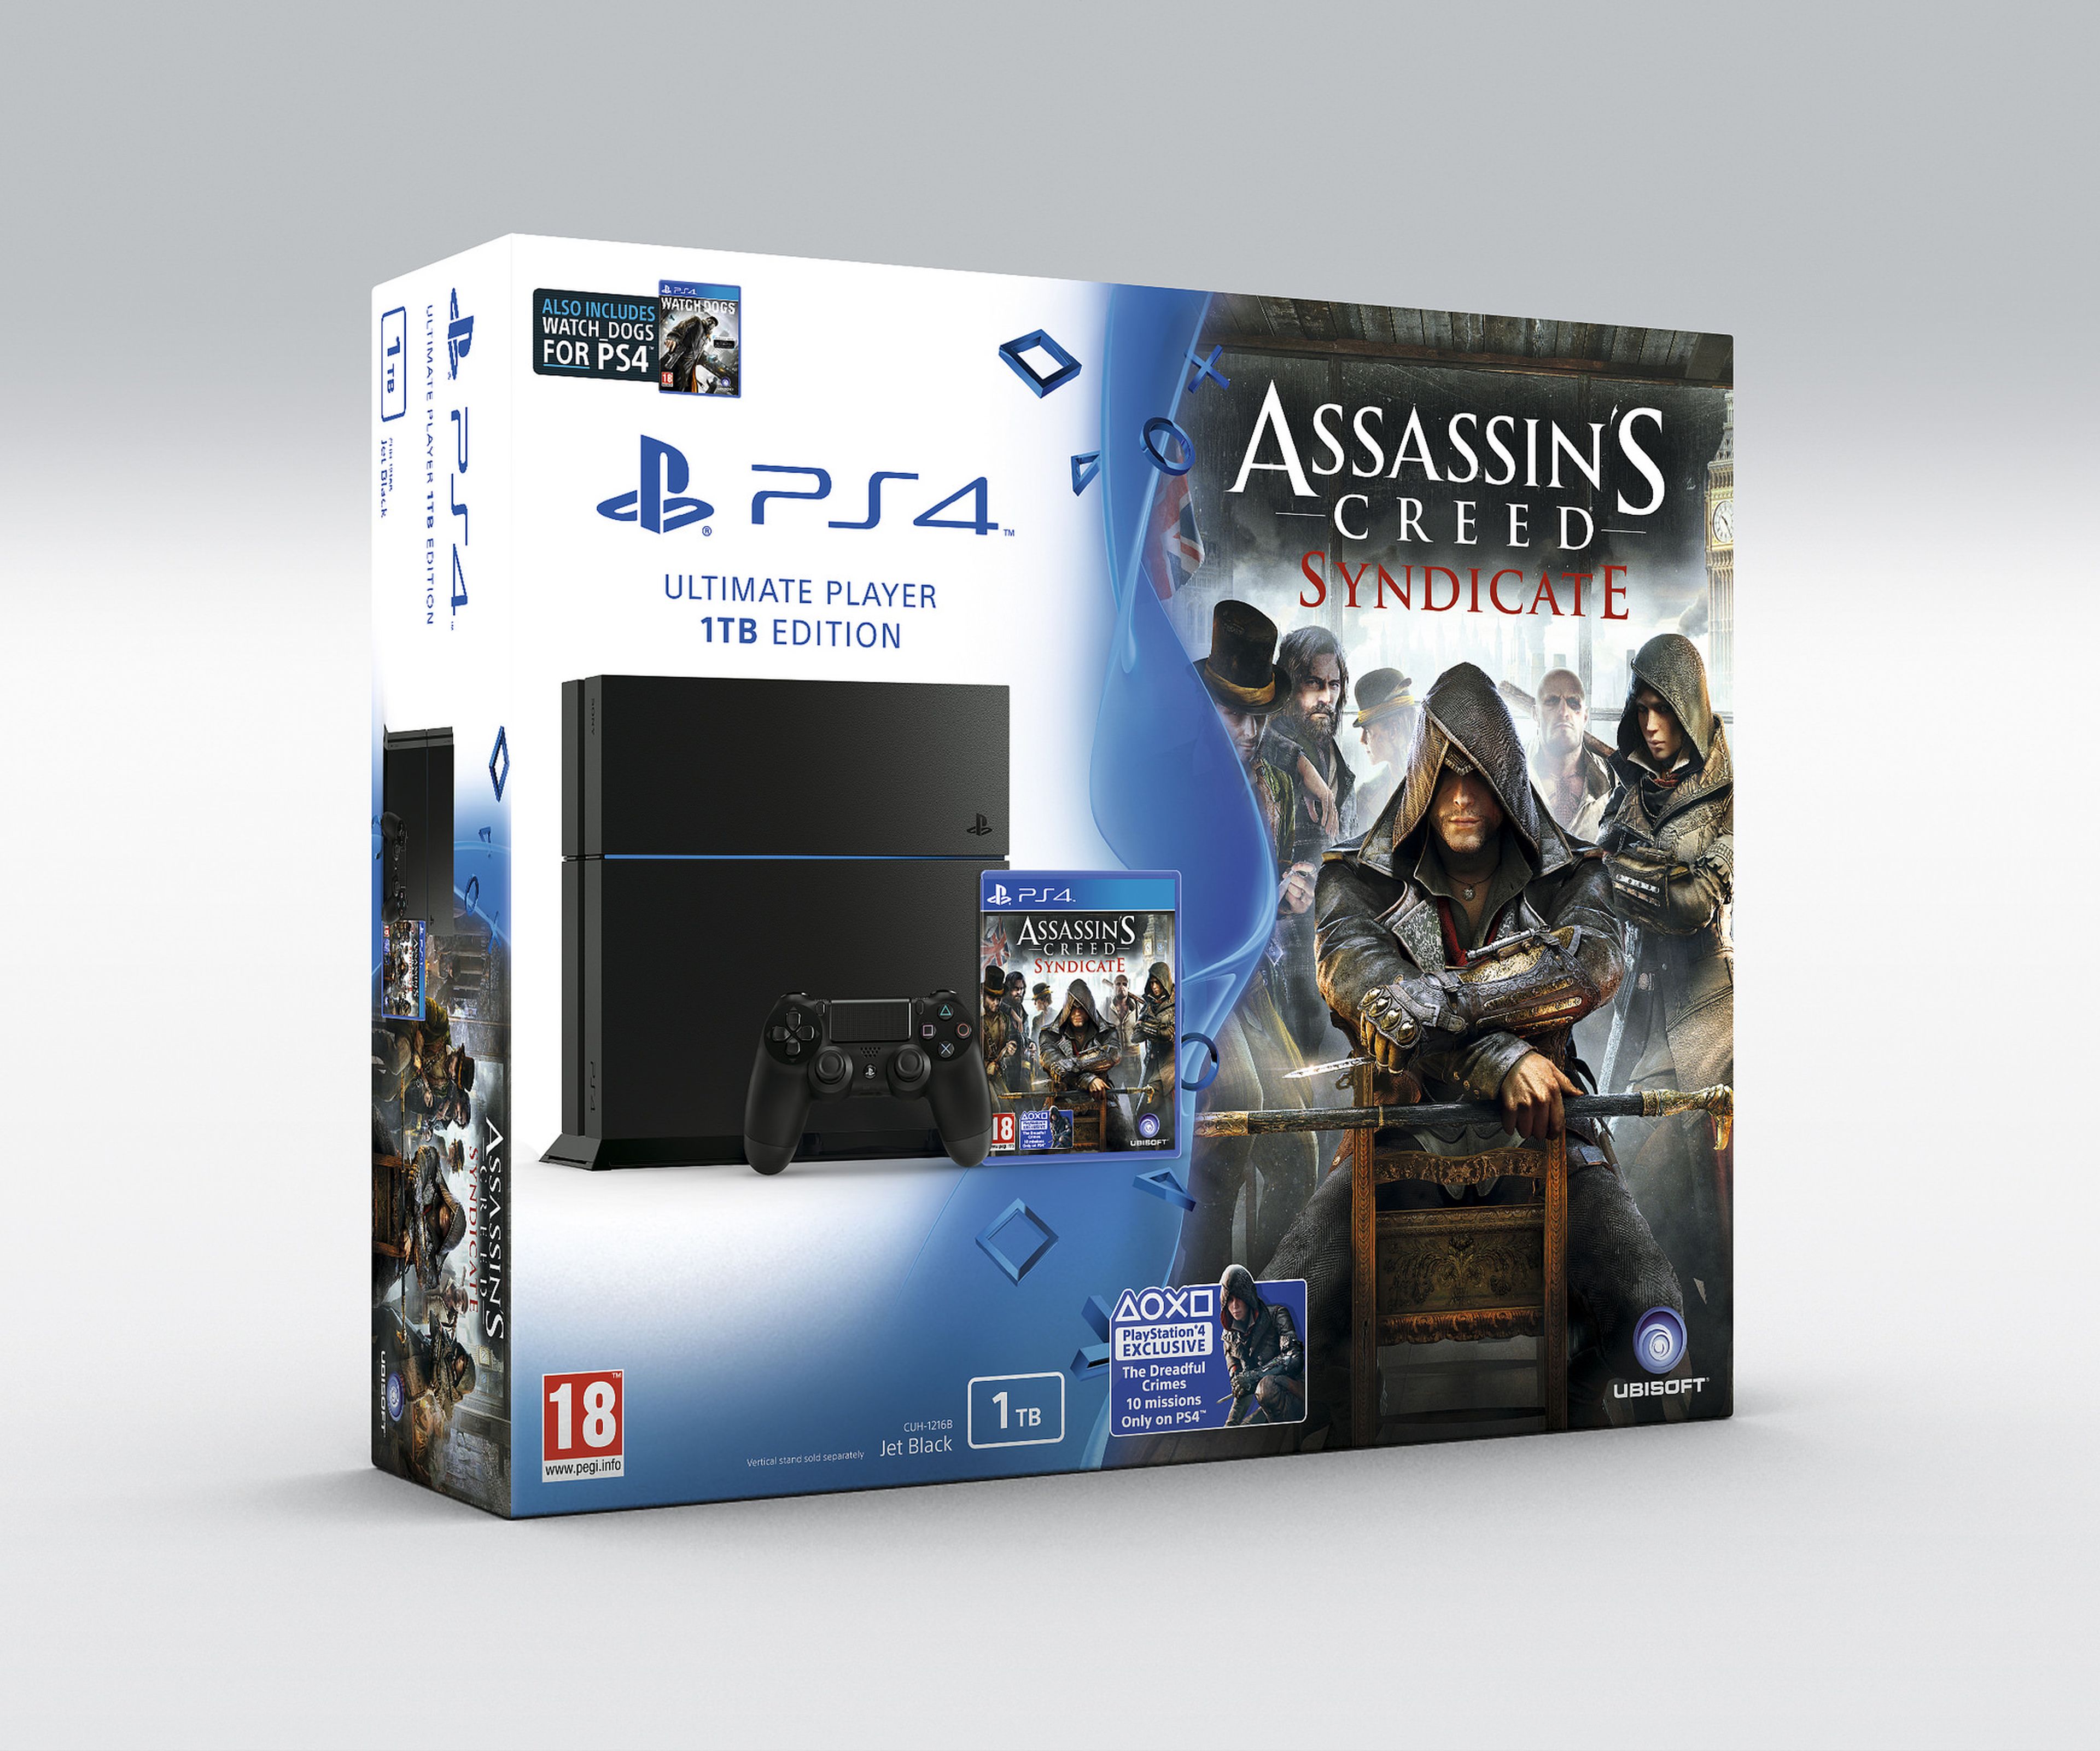 Assassin's Creed Syndicate, pack con PS4 1TB y misiones exclusivas